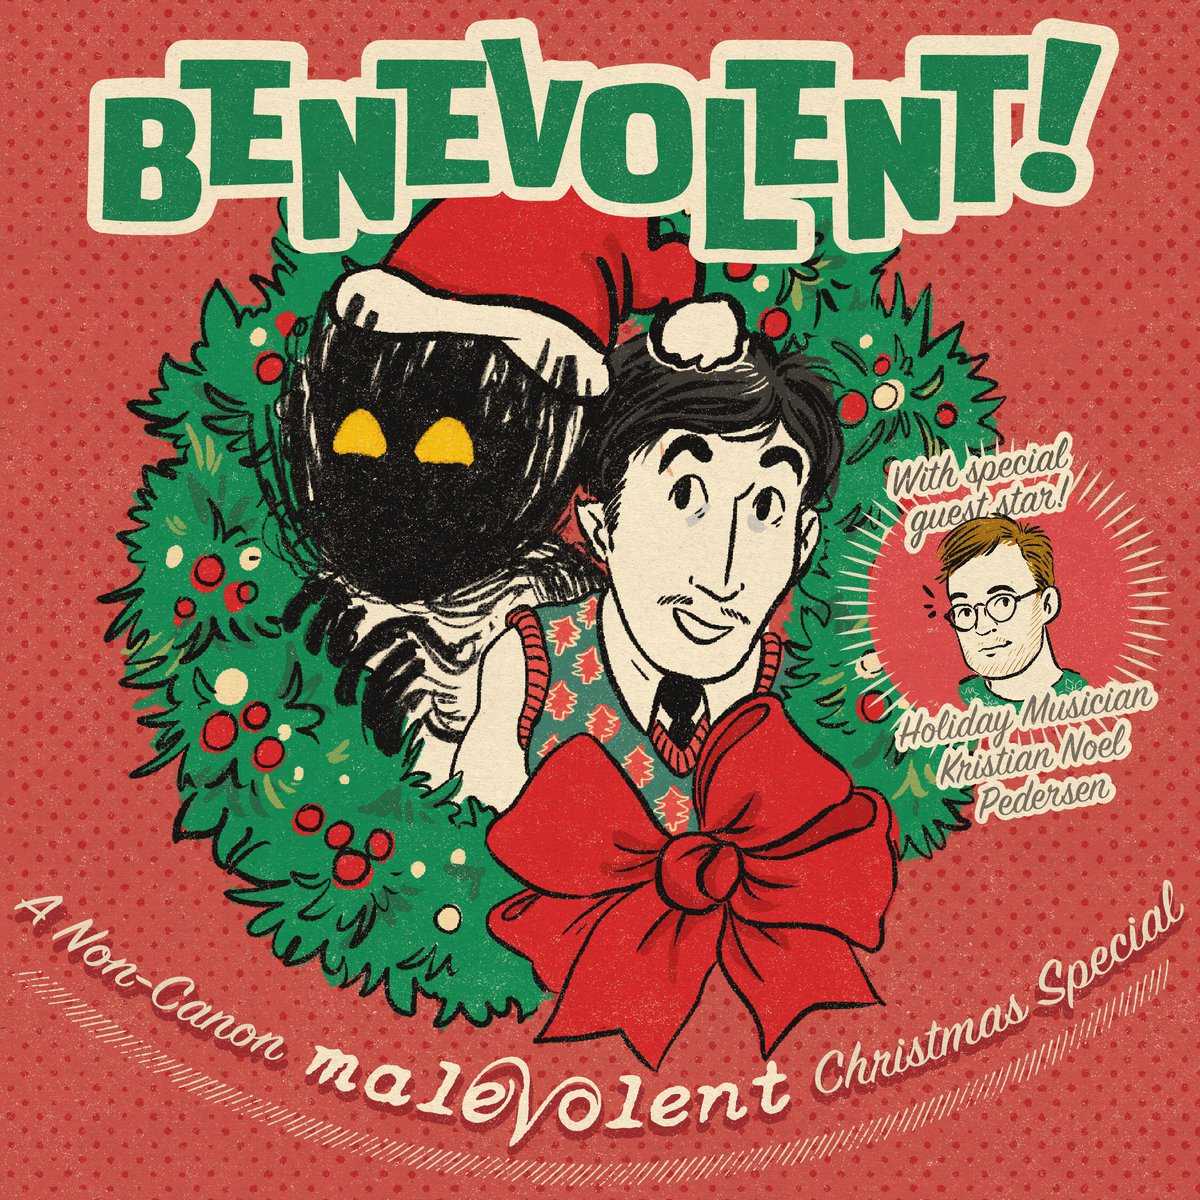 Coming this Christmas Eve...

BENEVOLENT! A Non-Canon Malevolent Christmas Special 

In this Holiday spectacular Arthur & John find themselves stuck at home on Christmas Eve after a terrible blizzard blows in...

#Malevolent #ChristmasSpecial #HolidaySpecial 

art by @DanRuggeri